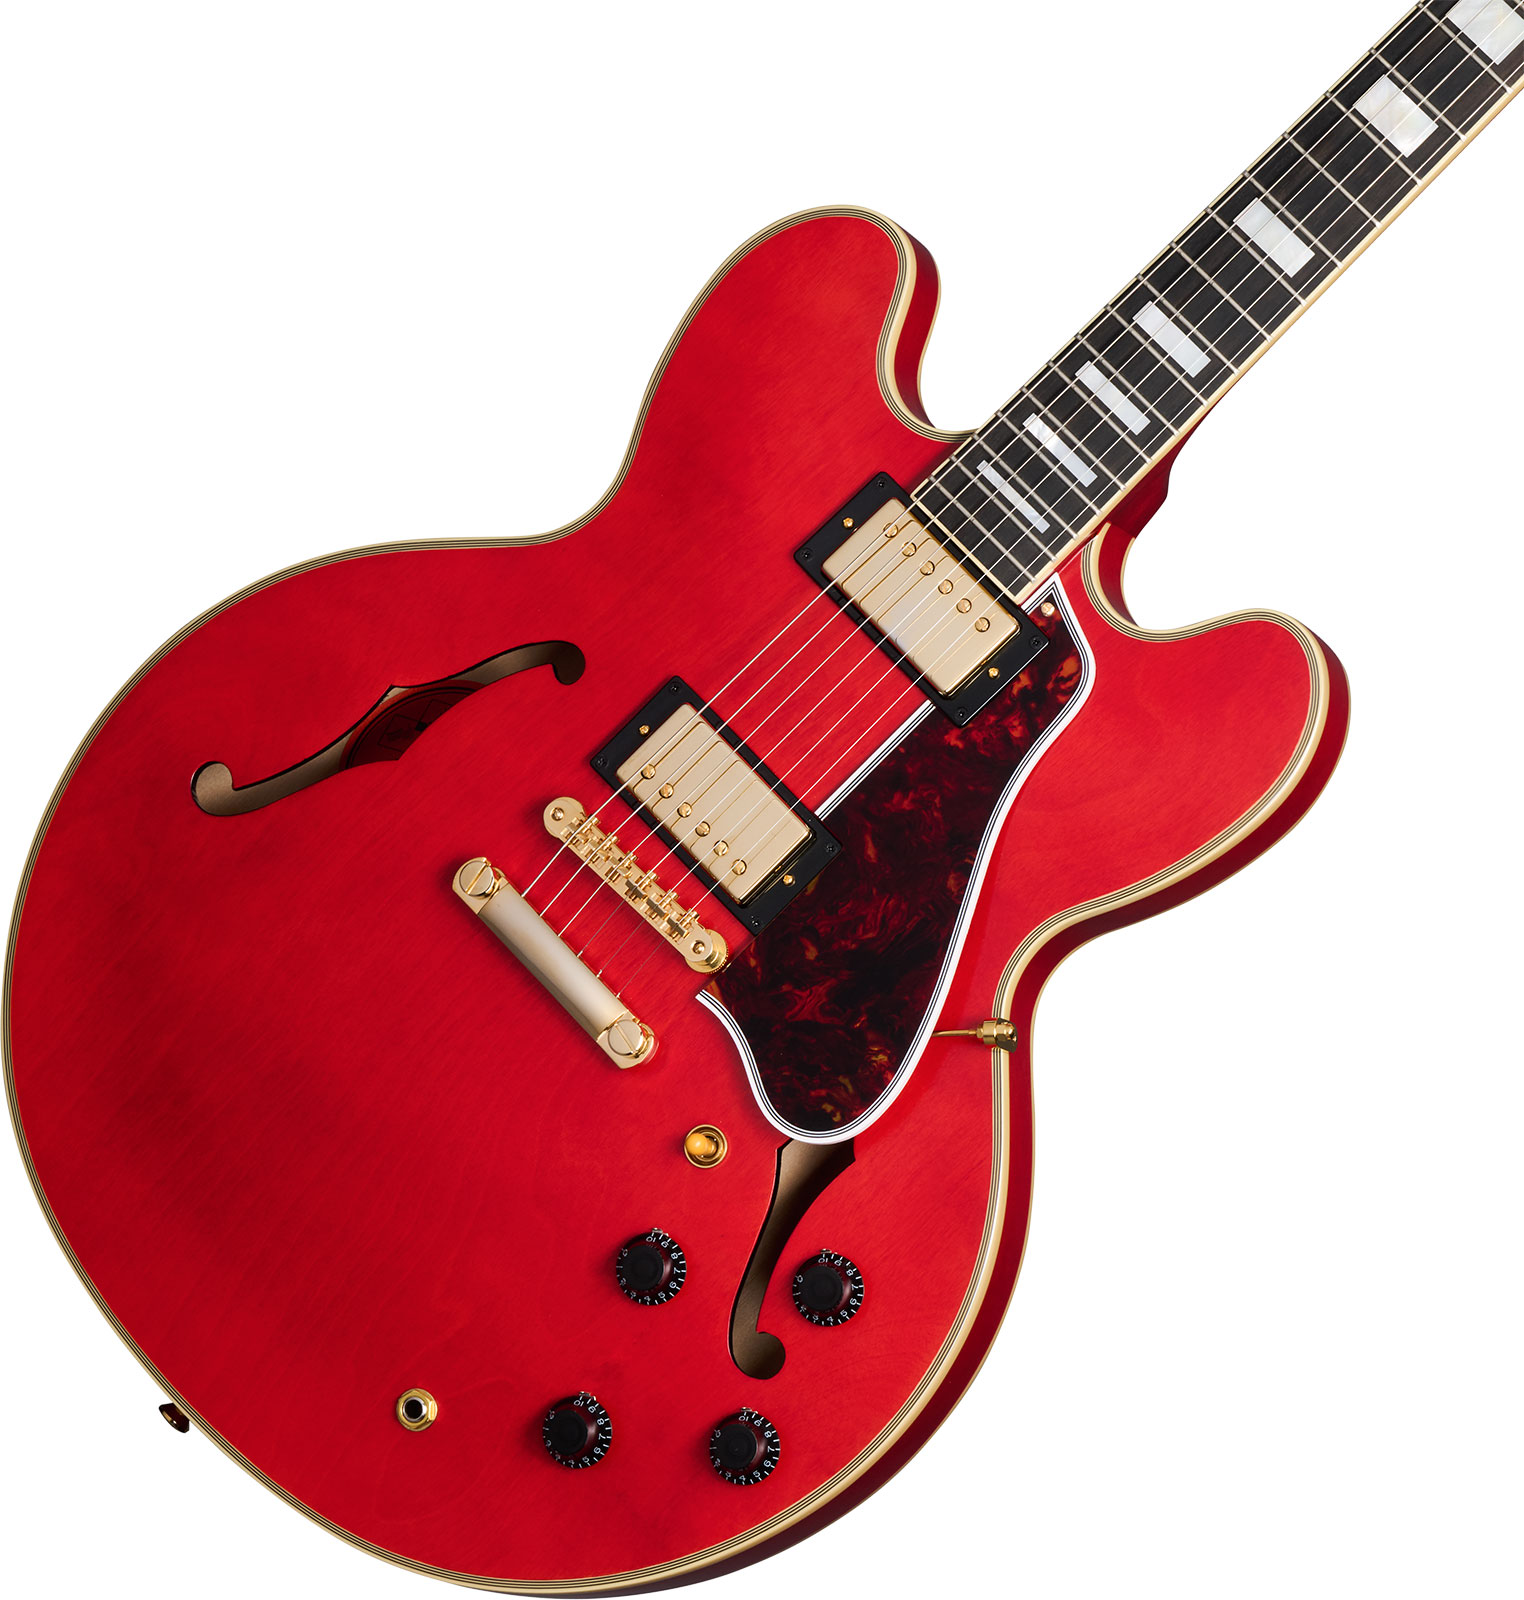 Epiphone Es355 1959 Inspired By 2h Gibson Ht Eb - Vos Cherry Red - Guitarra eléctrica semi caja - Variation 3